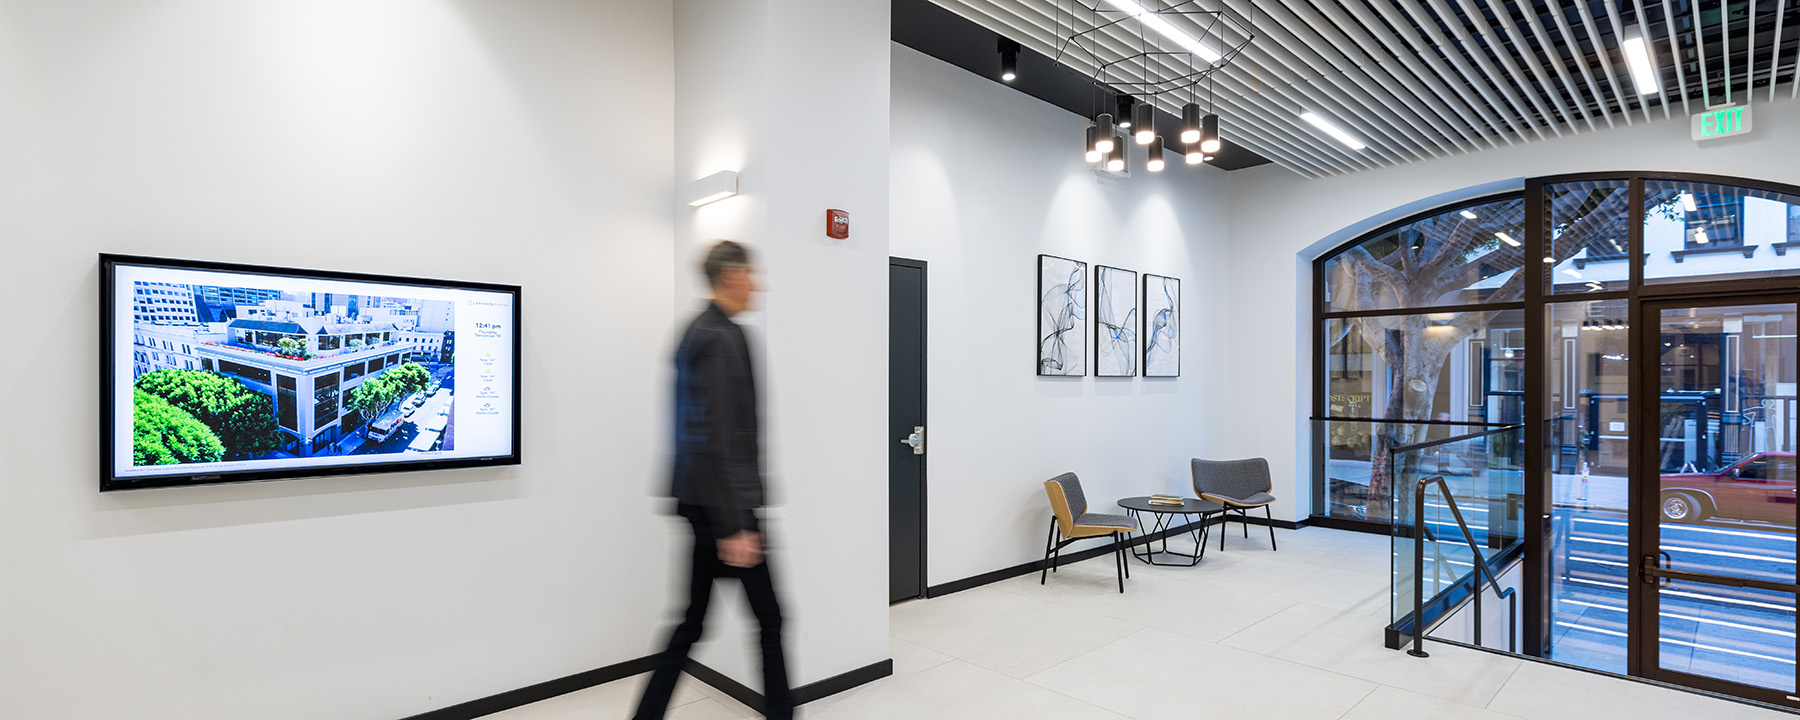 Office lobby lighting at 735 Montgomery Street creates layers of light with wall-mounted up and down lights, pendant lighting and linear ceiling lighting.